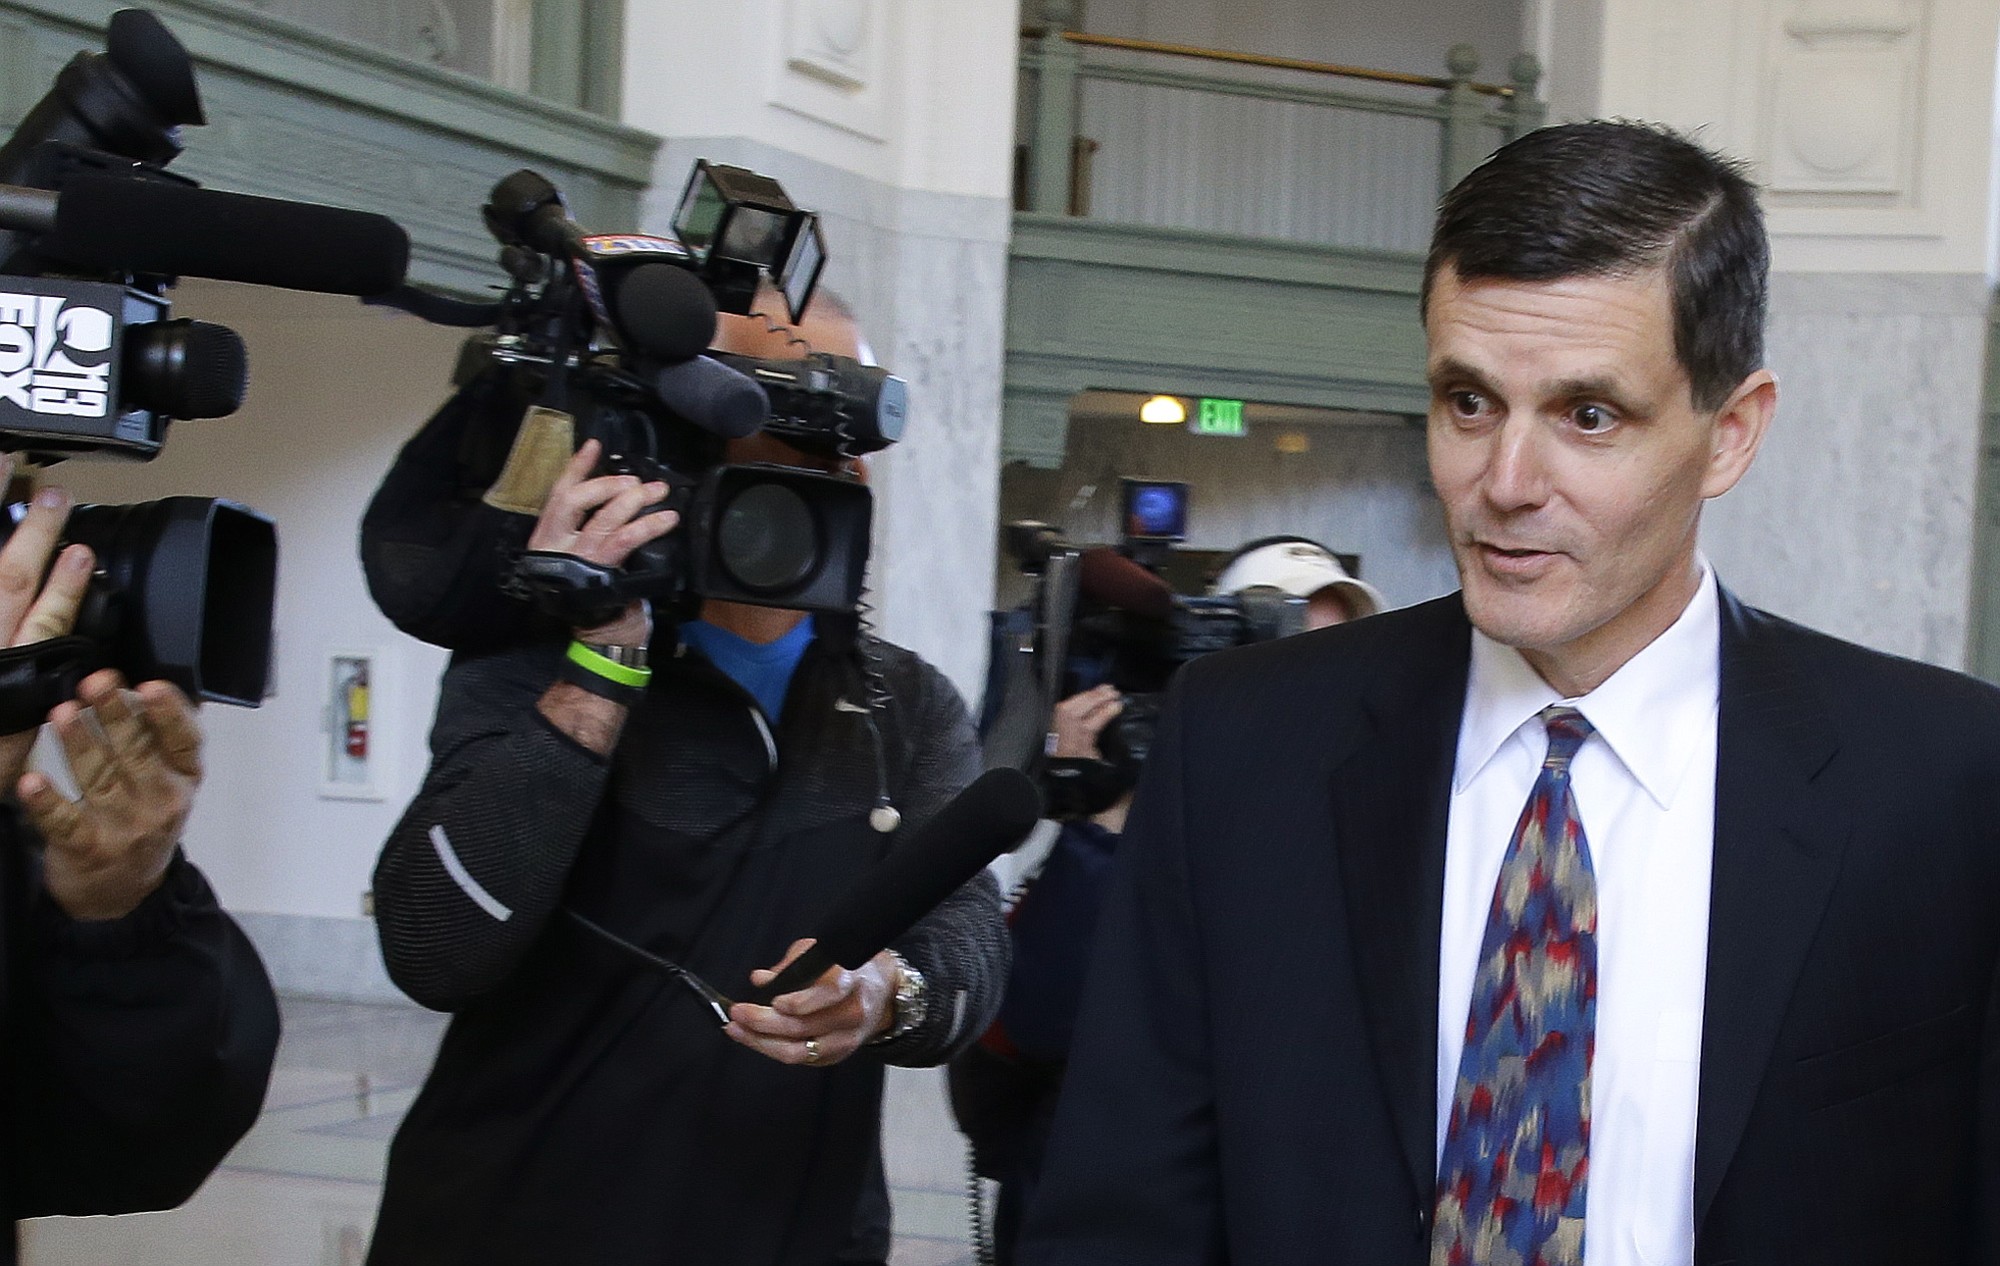 Washington state Auditor Troy Kelley leaves the Federal Courthouse in Tacoma on April 16, after pleading not guilty to a federal grand jury indictment on charges of filing false tax returns, obstruction, and possession of stolen property.